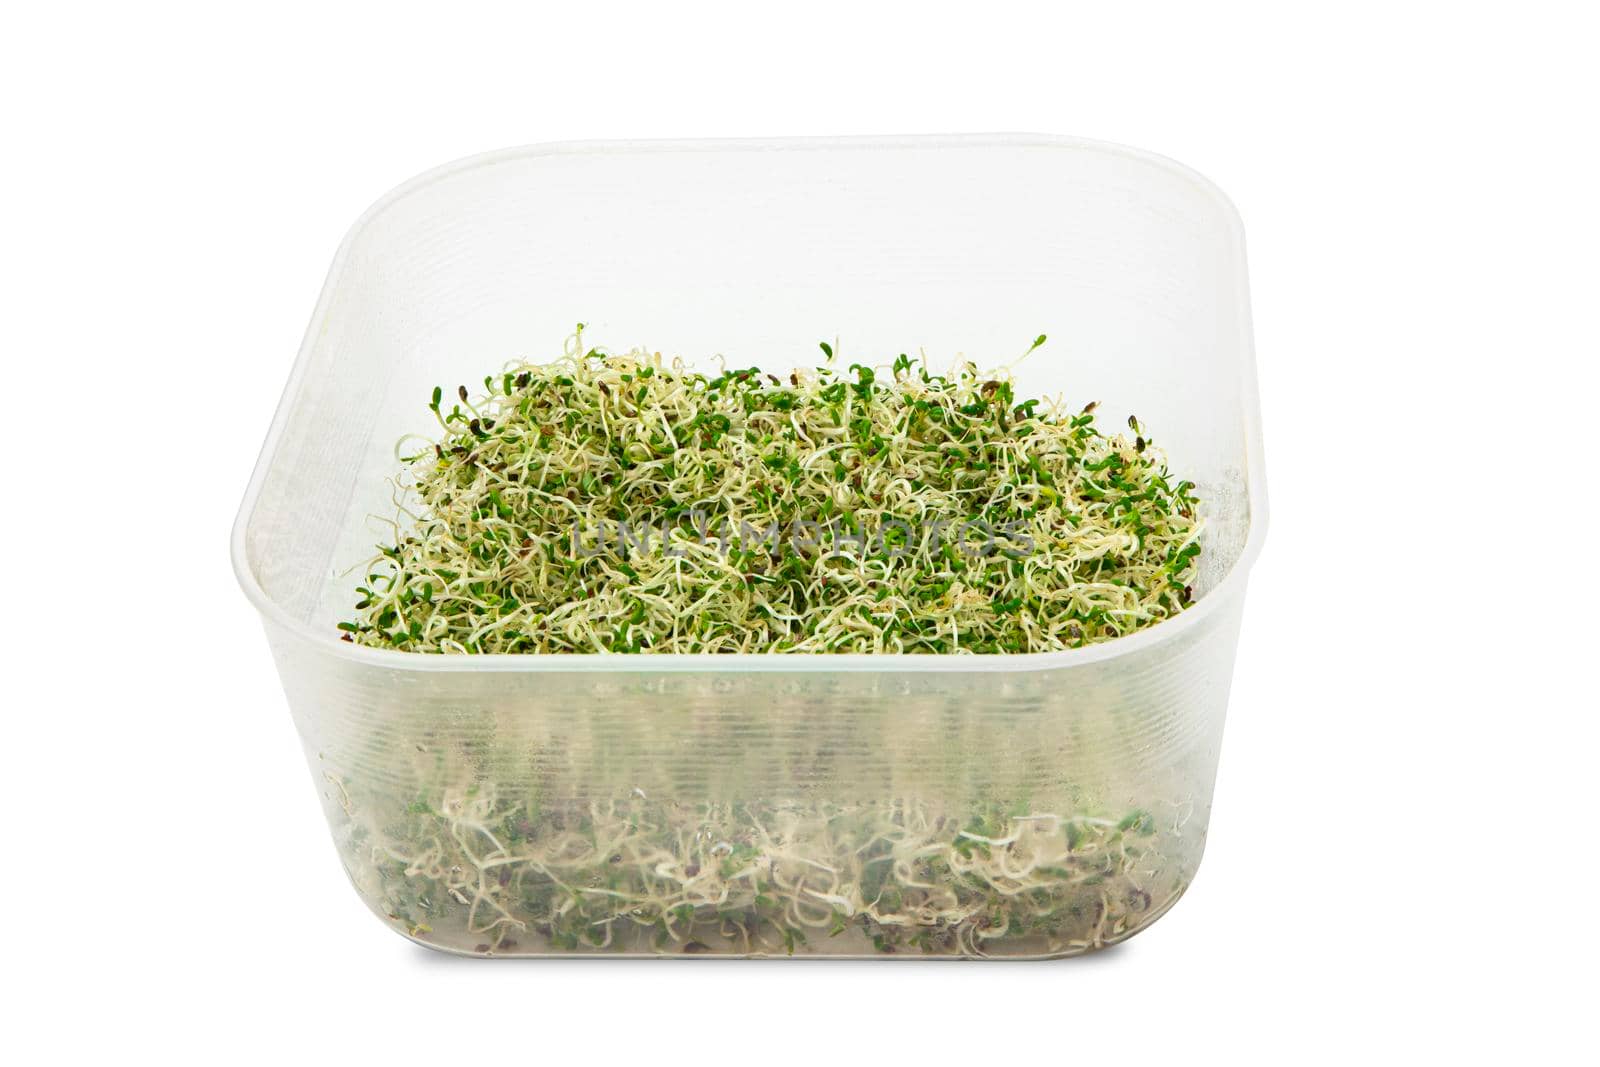 Organic young alfalfa sprouts in a plastic container on white background. Organic food. Close up with clipping path